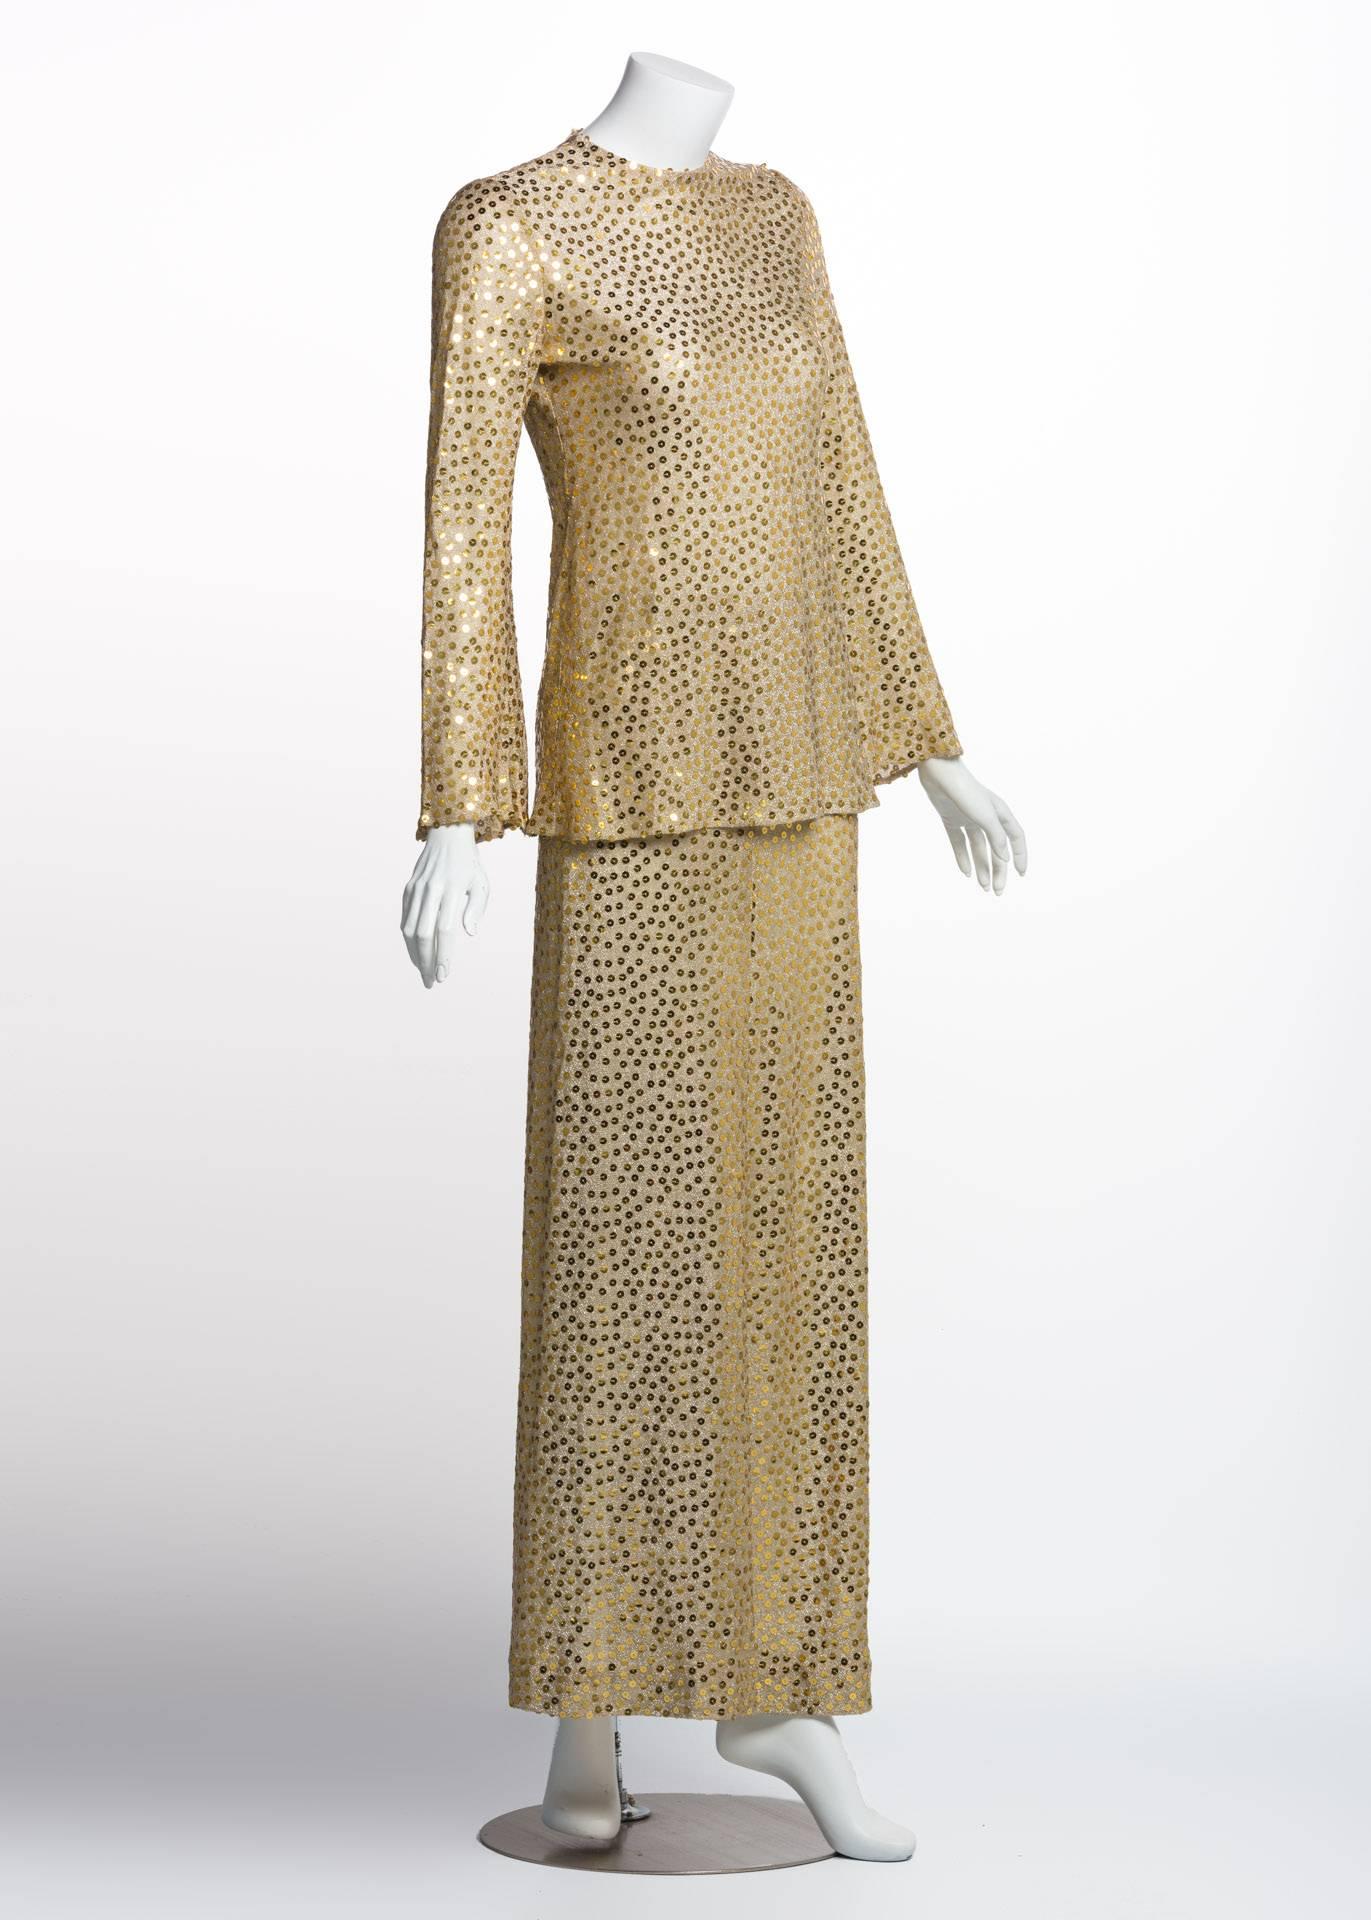 Crack open a 1970s-era Vogue or Harper’s and you’ll surely see a fashion spread featuring garments by American designer Mollie Parnis. A pantsuit version of this ensemble appears in the March 1974 issue of Vogue, where the metallic heels and bouncy